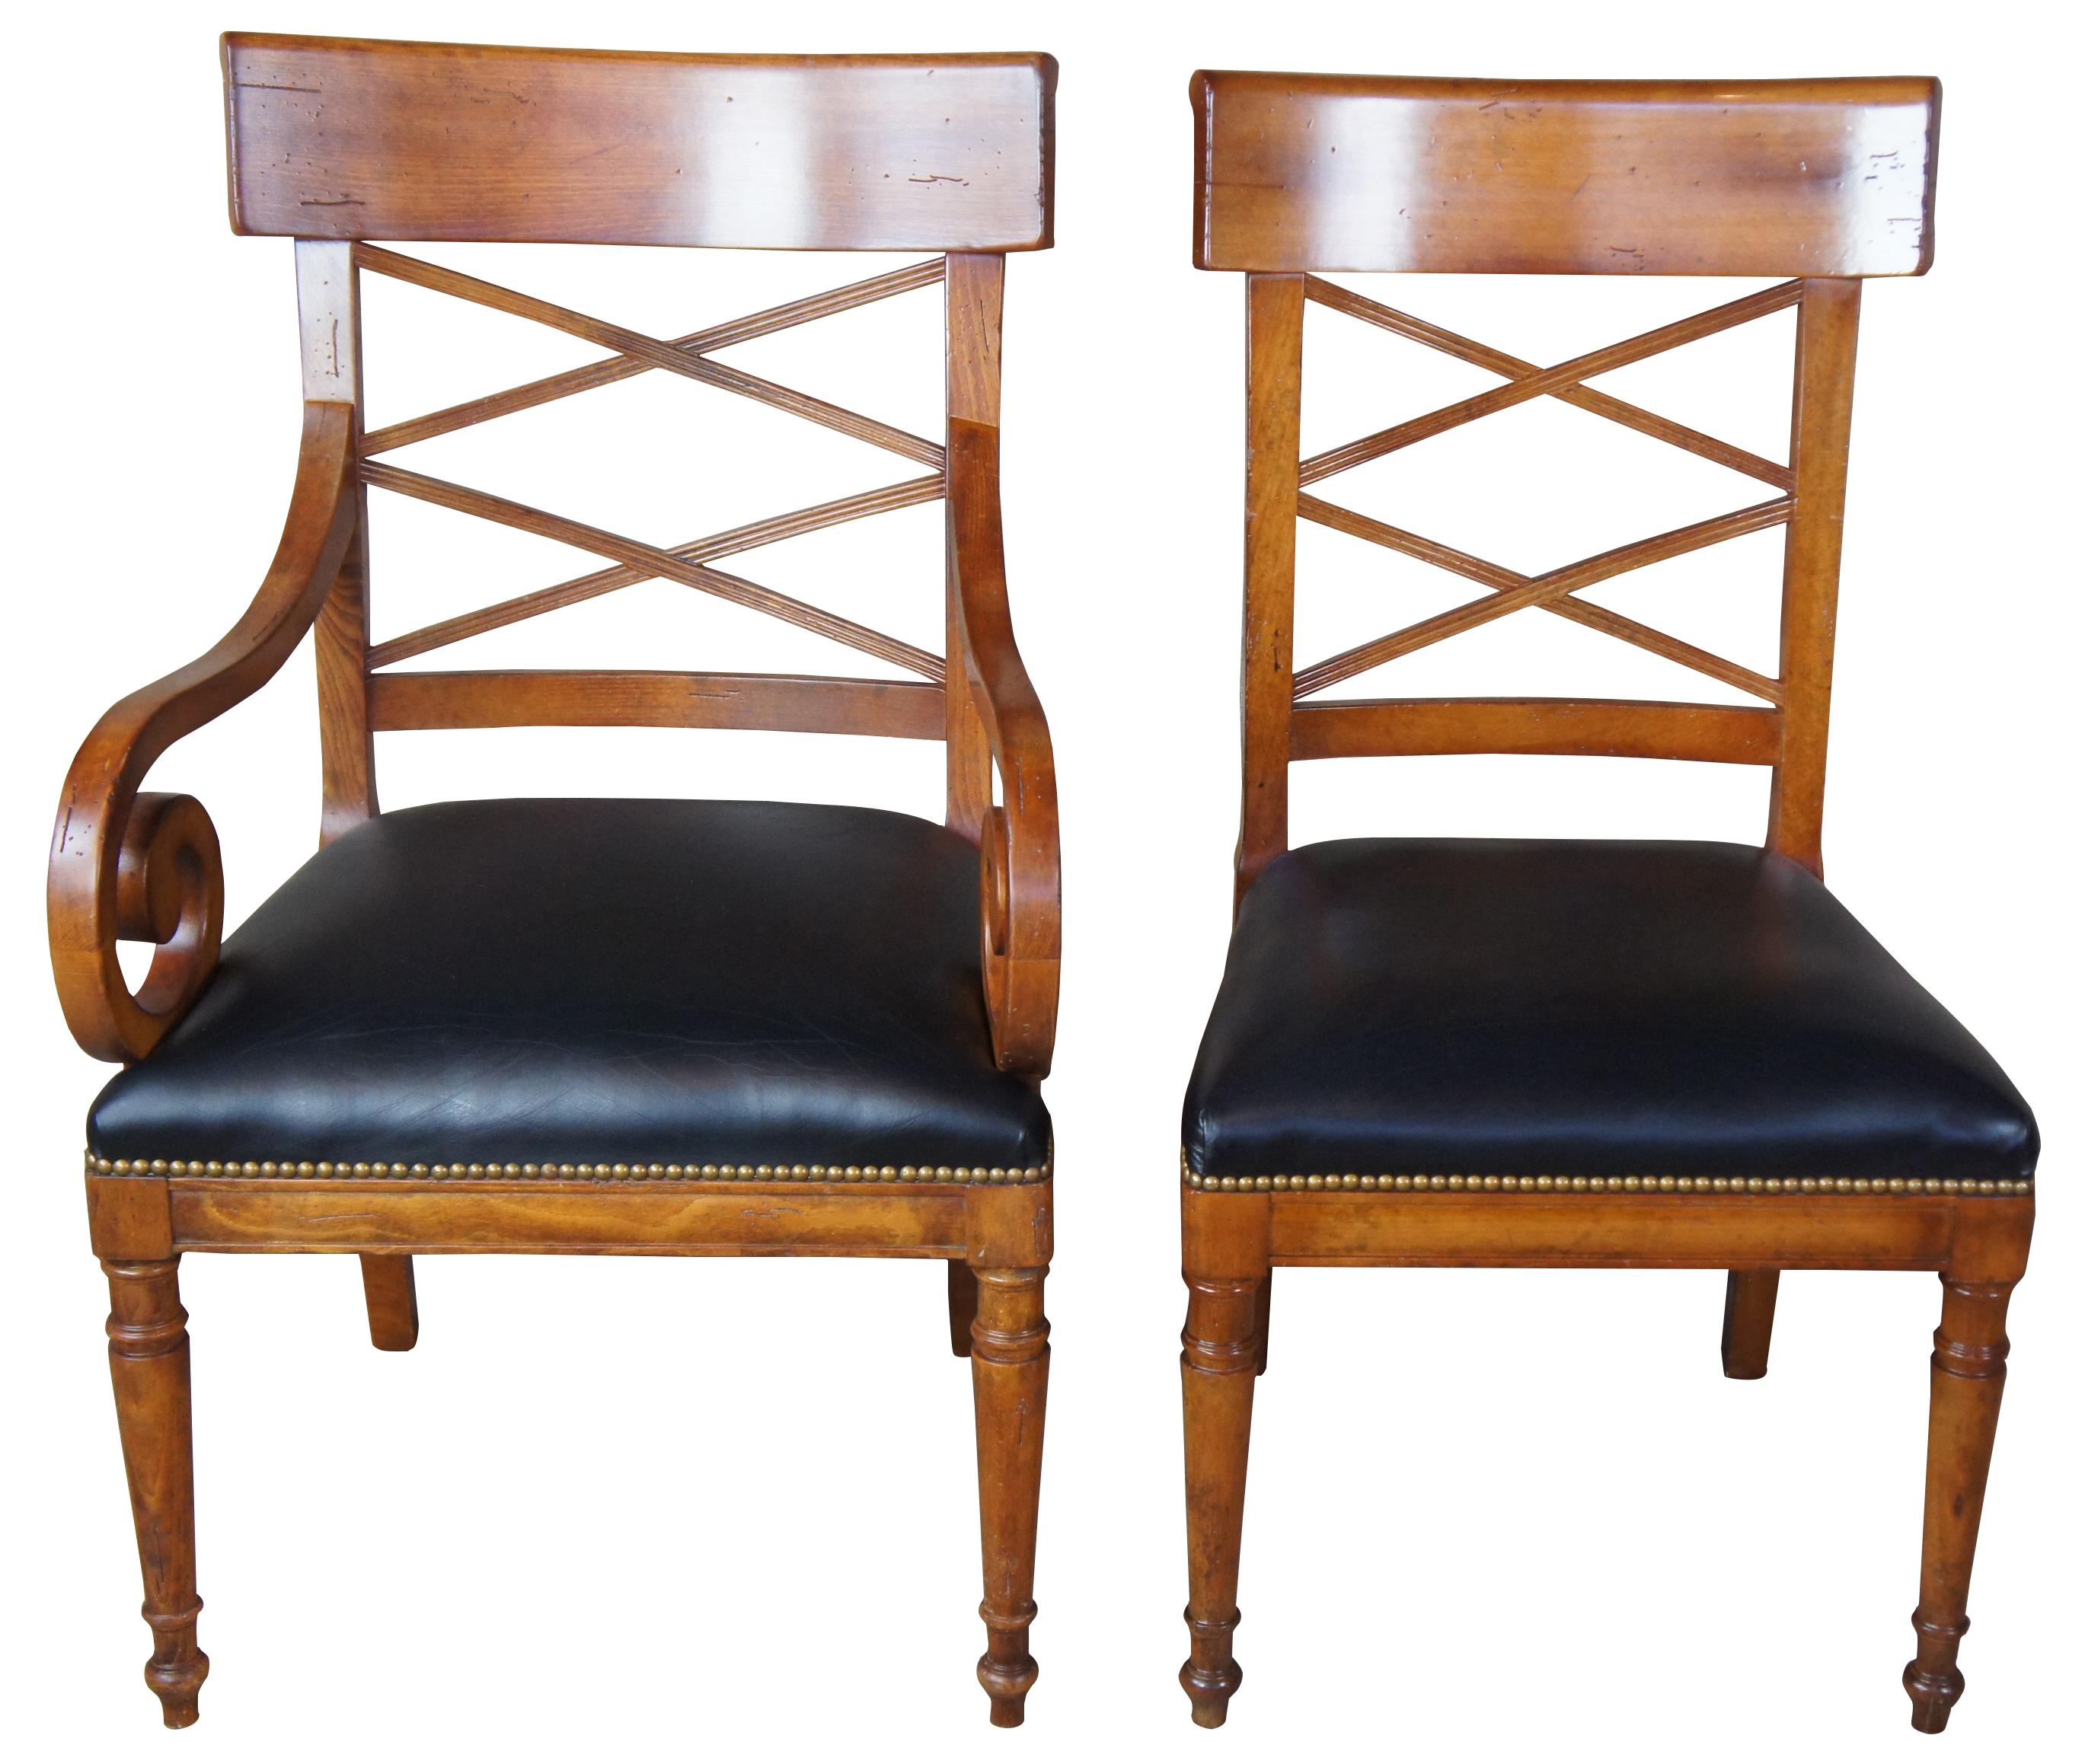 Milling Road for Baker (American, Grand Rapids, 1903-), late 20th century. Set of Neoclassic walnut dining chairs, featuring a curved crest scroll arm rail, an open double X-form fluted lattice back, with molded aprons, tapering tuned legs, and